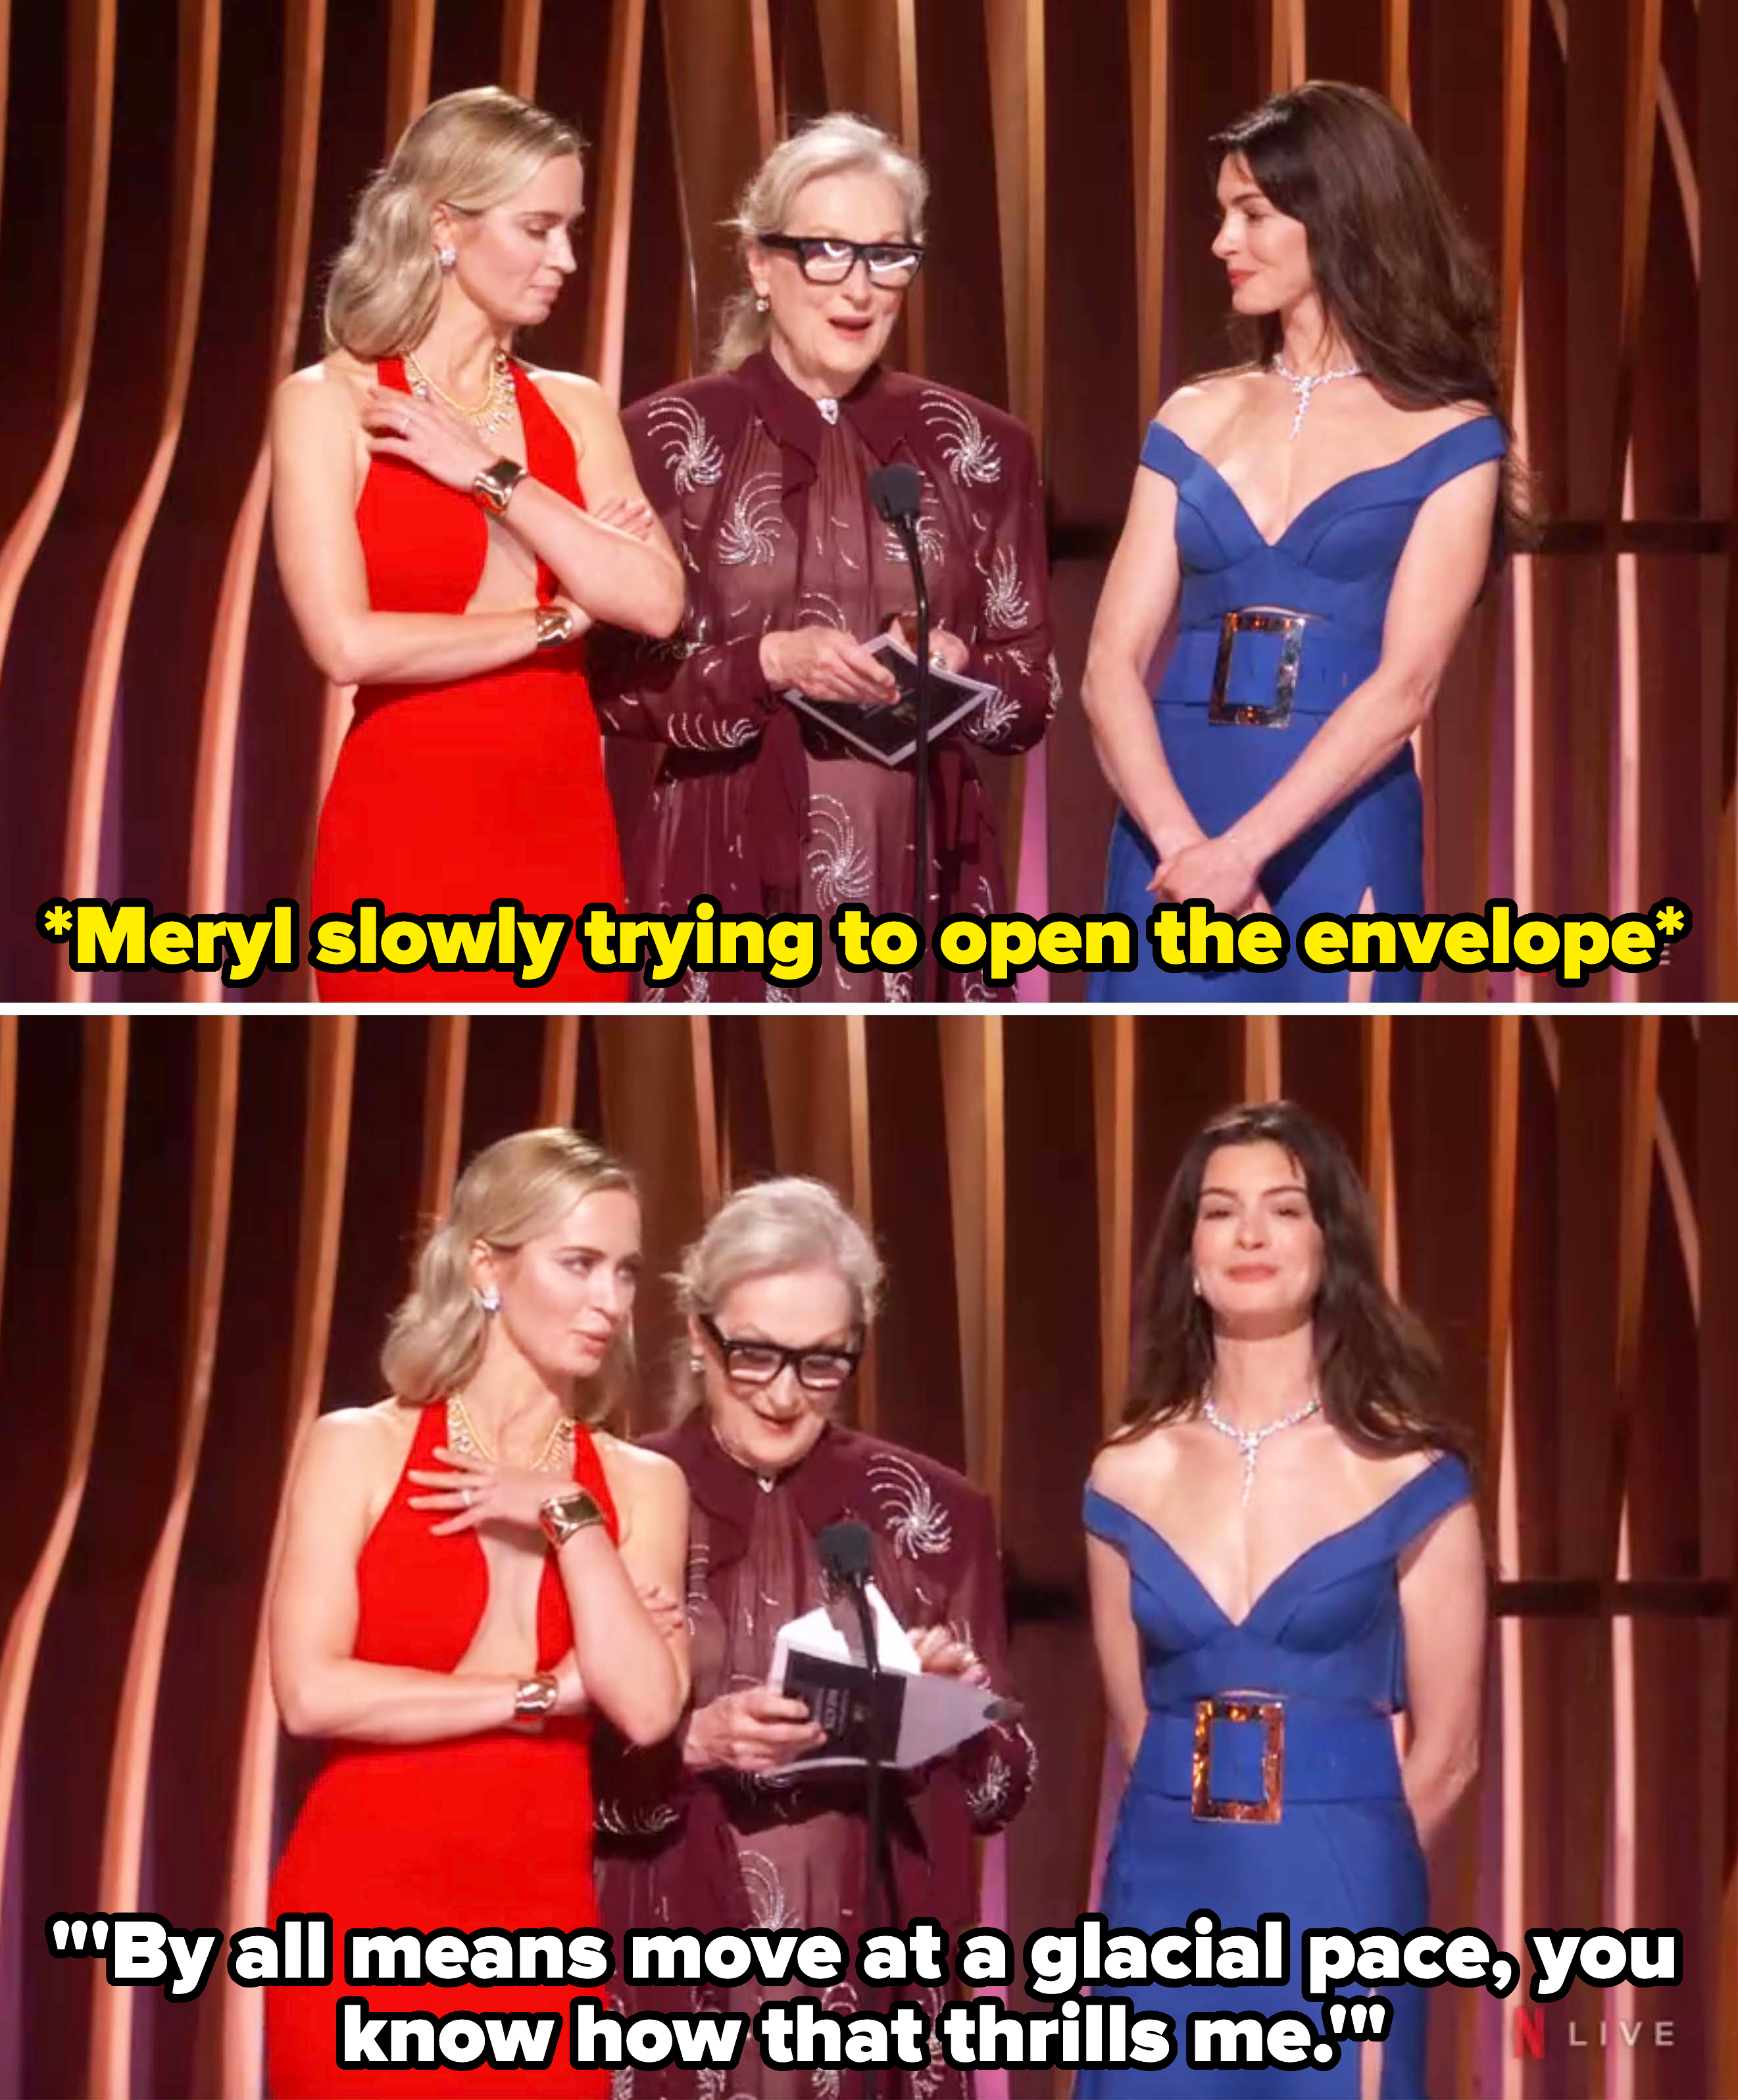 Emily Blunt, Meryl Streep, and Anne Hathaway onstage at the SAG Awards